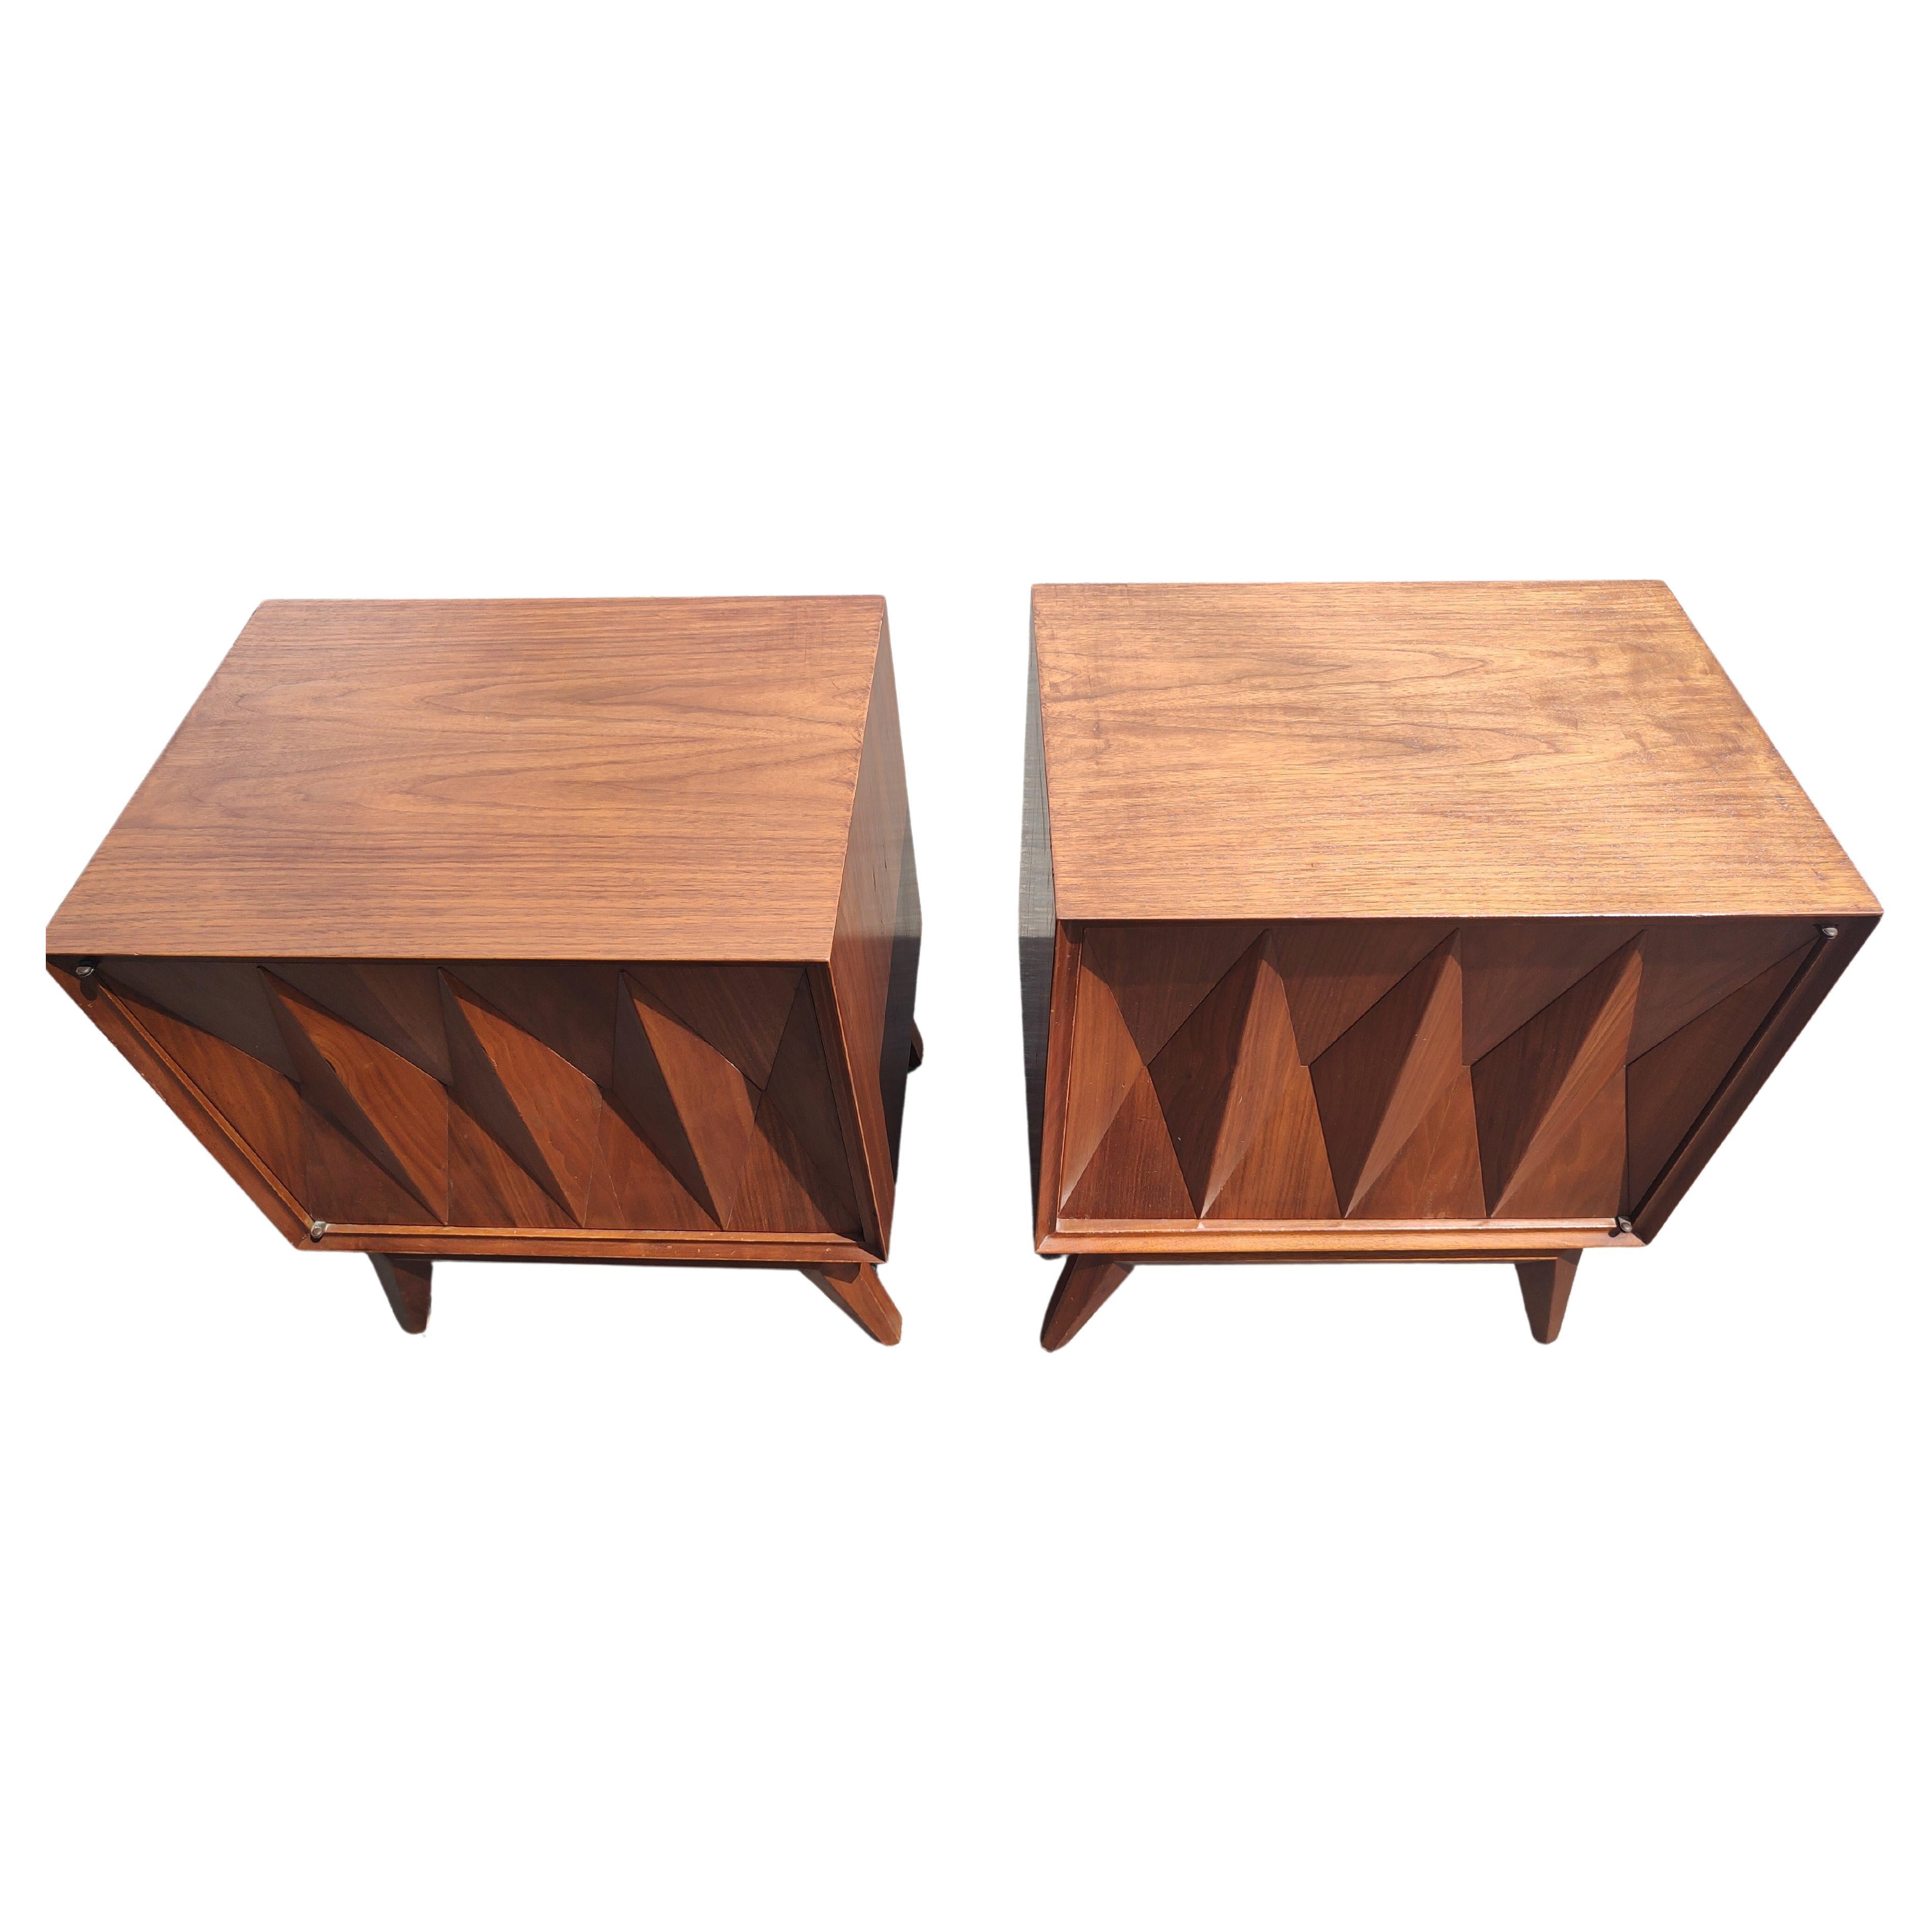 Fabulous pair of walnut diamond faceted single door night stands with an interior shelf. In excellent vintage condition with minimal wear. Such a beautiful design, push button doors open effortlessly from opposite sides. Priced and sold as a pair.